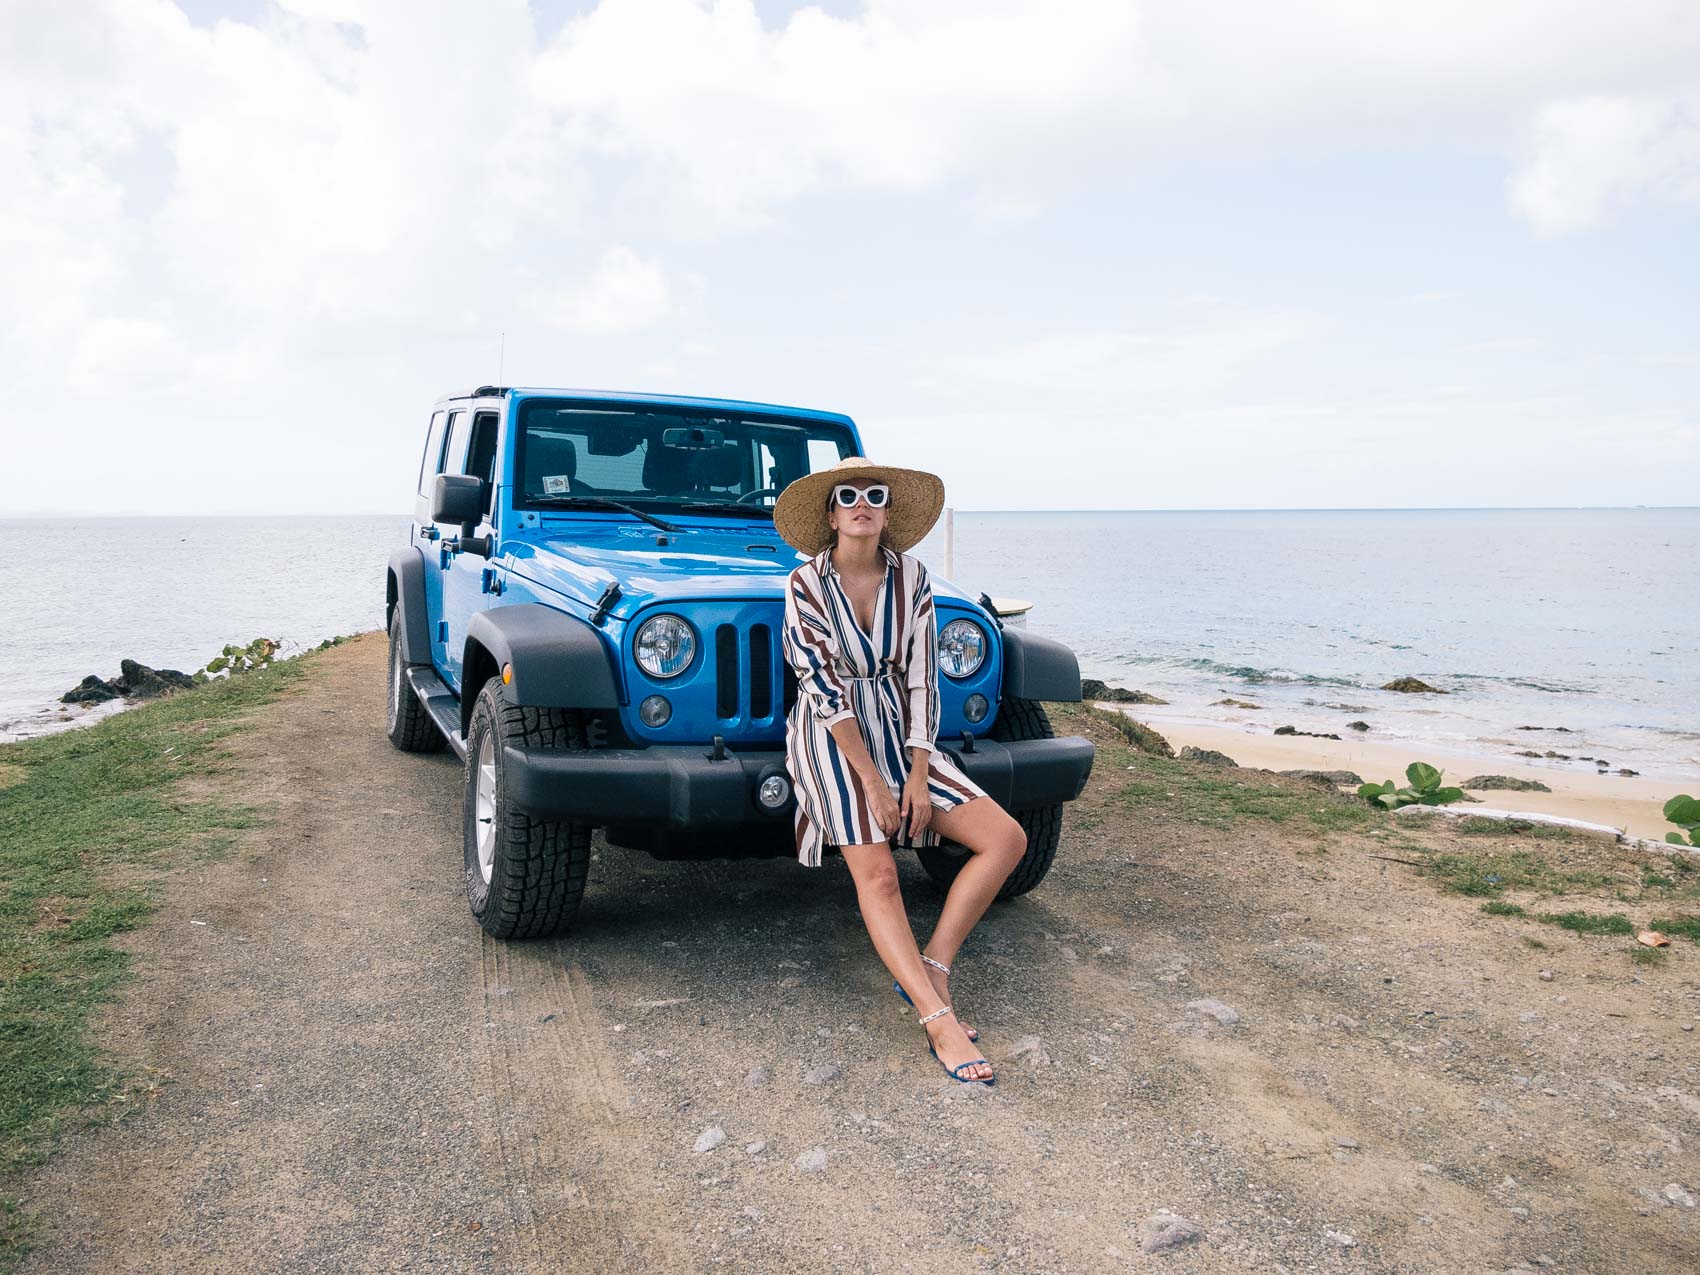 Maristella wears a Topshop stripe dress, Tory Burch sandals, straw wide brim hat and Celine sunglasses. Getting around Vieques Island in a Jeep